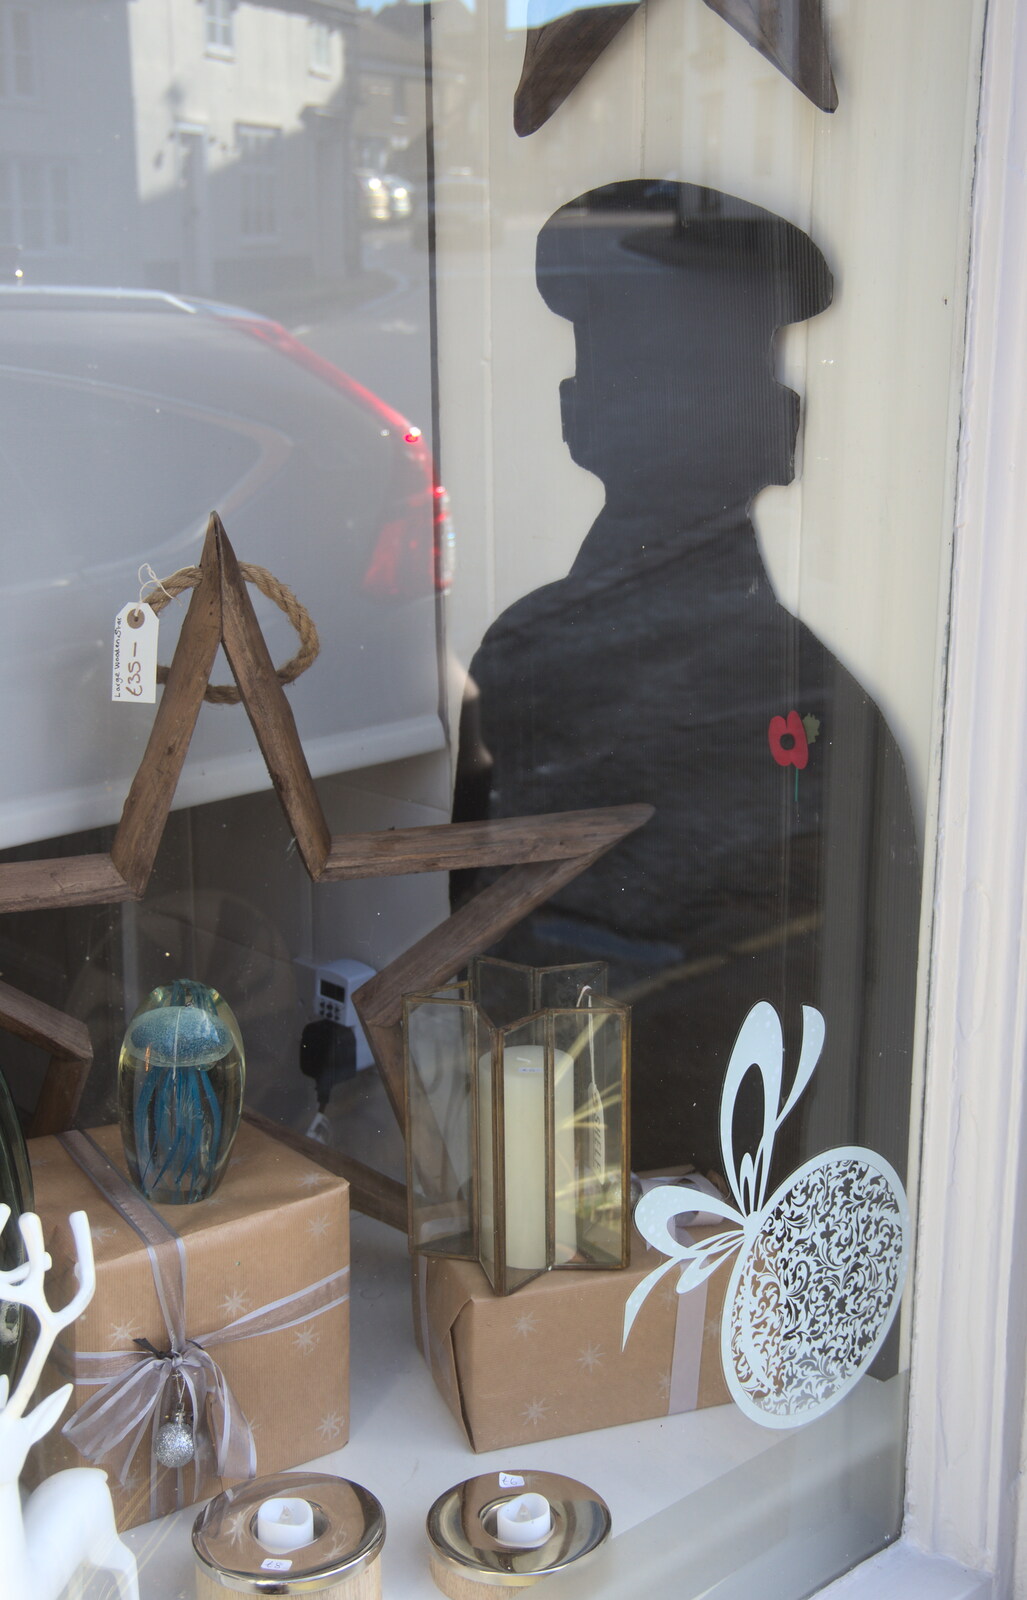 One of the 'tommy' silhouettes in the shop 'Shelf' from The Remembrance Sunday Parade, Eye, Suffolk - 11th November 2018